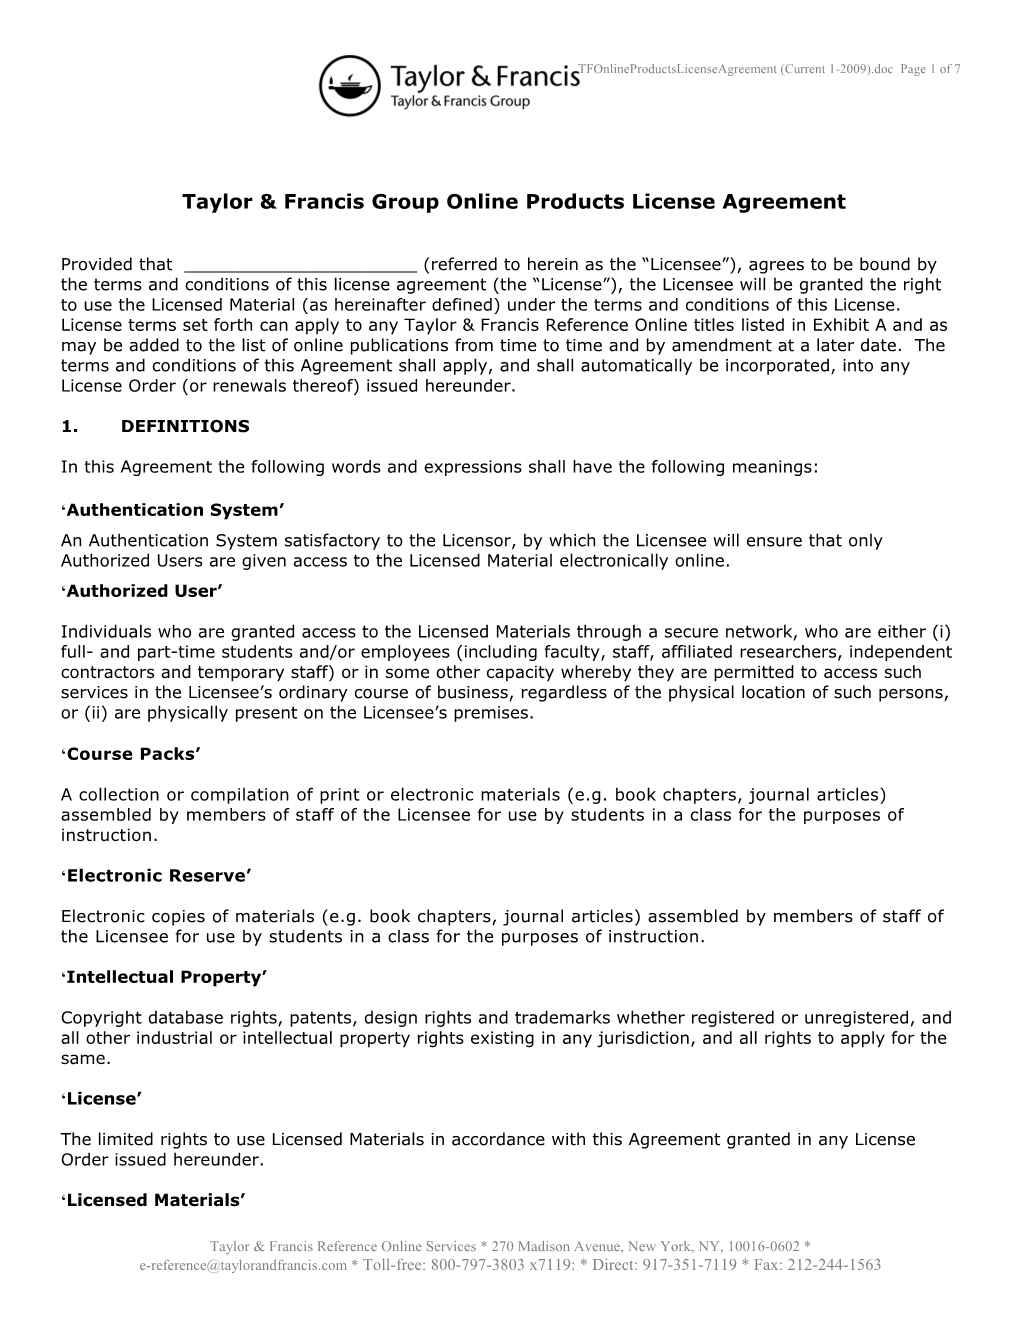 Online Products License Agreement